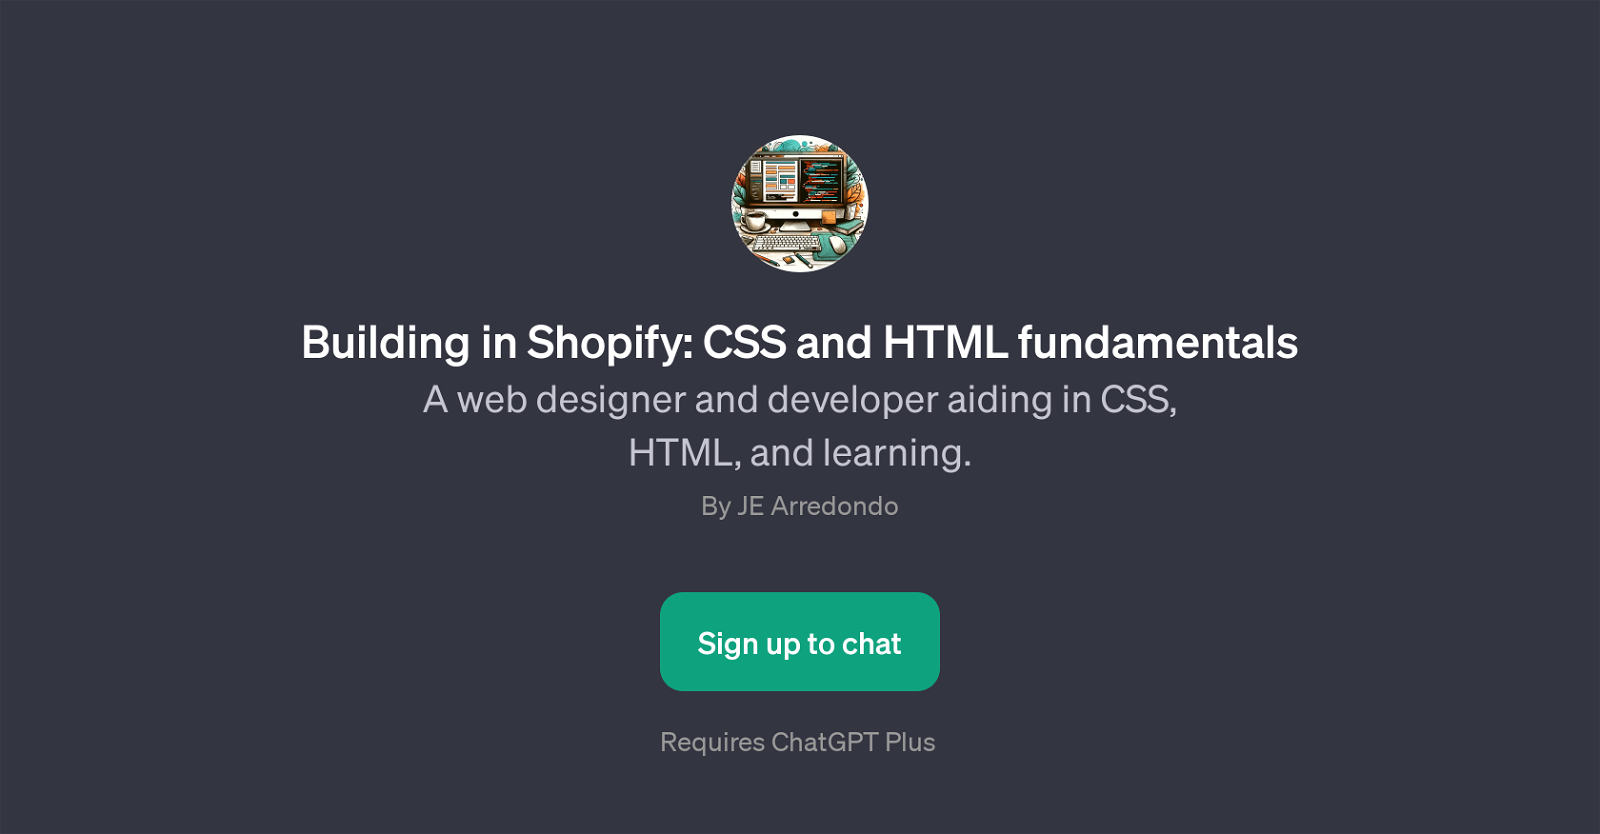 Building in Shopify: CSS and HTML fundamentals website